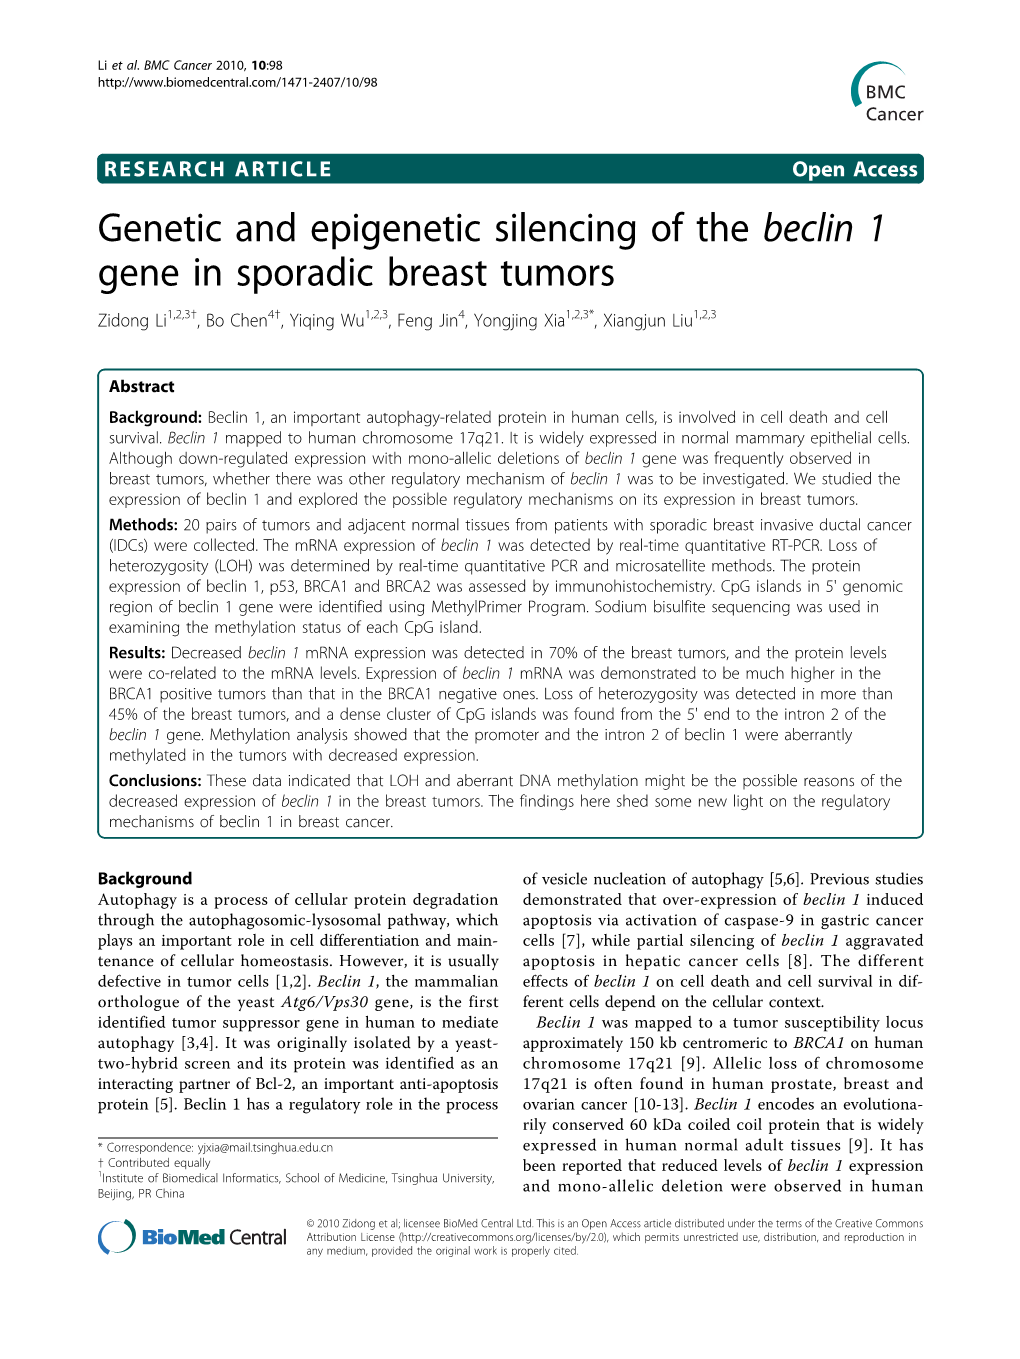 Genetic and Epigenetic Silencing of the Beclin 1 Gene in Sporadic Breast